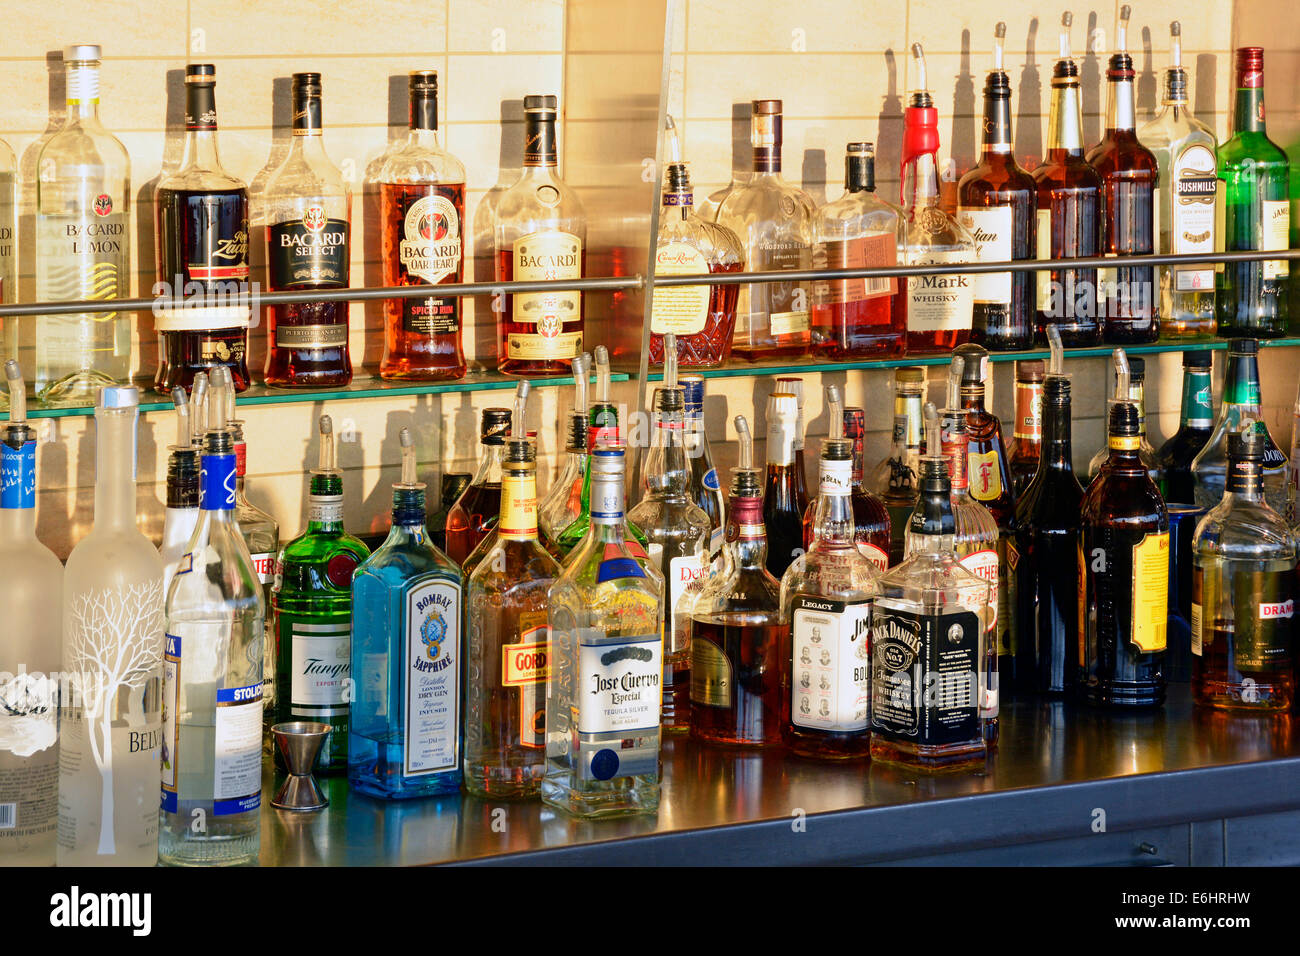 Cruise ship sun deck closeup of spirit drinks available behind outdoor bar counter including bottles of Gin, Bicardi & Whiskey Stock Photo